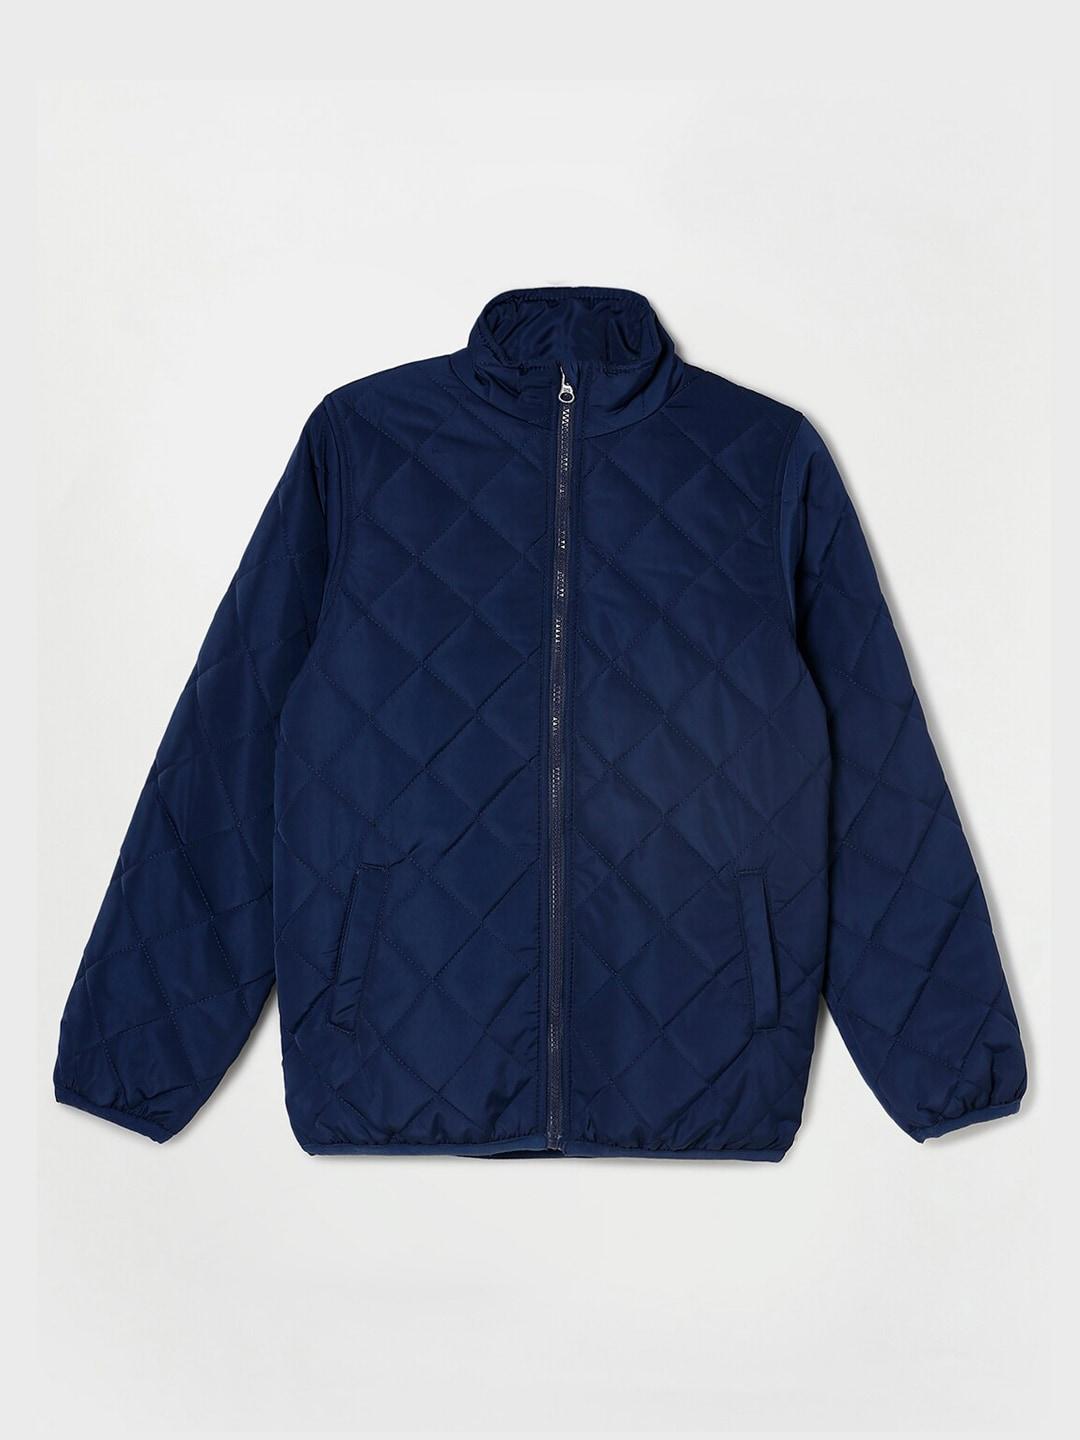 fame-forever-by-lifestyle-boys-navy-blue-solid-lightweight-quilted-jacket